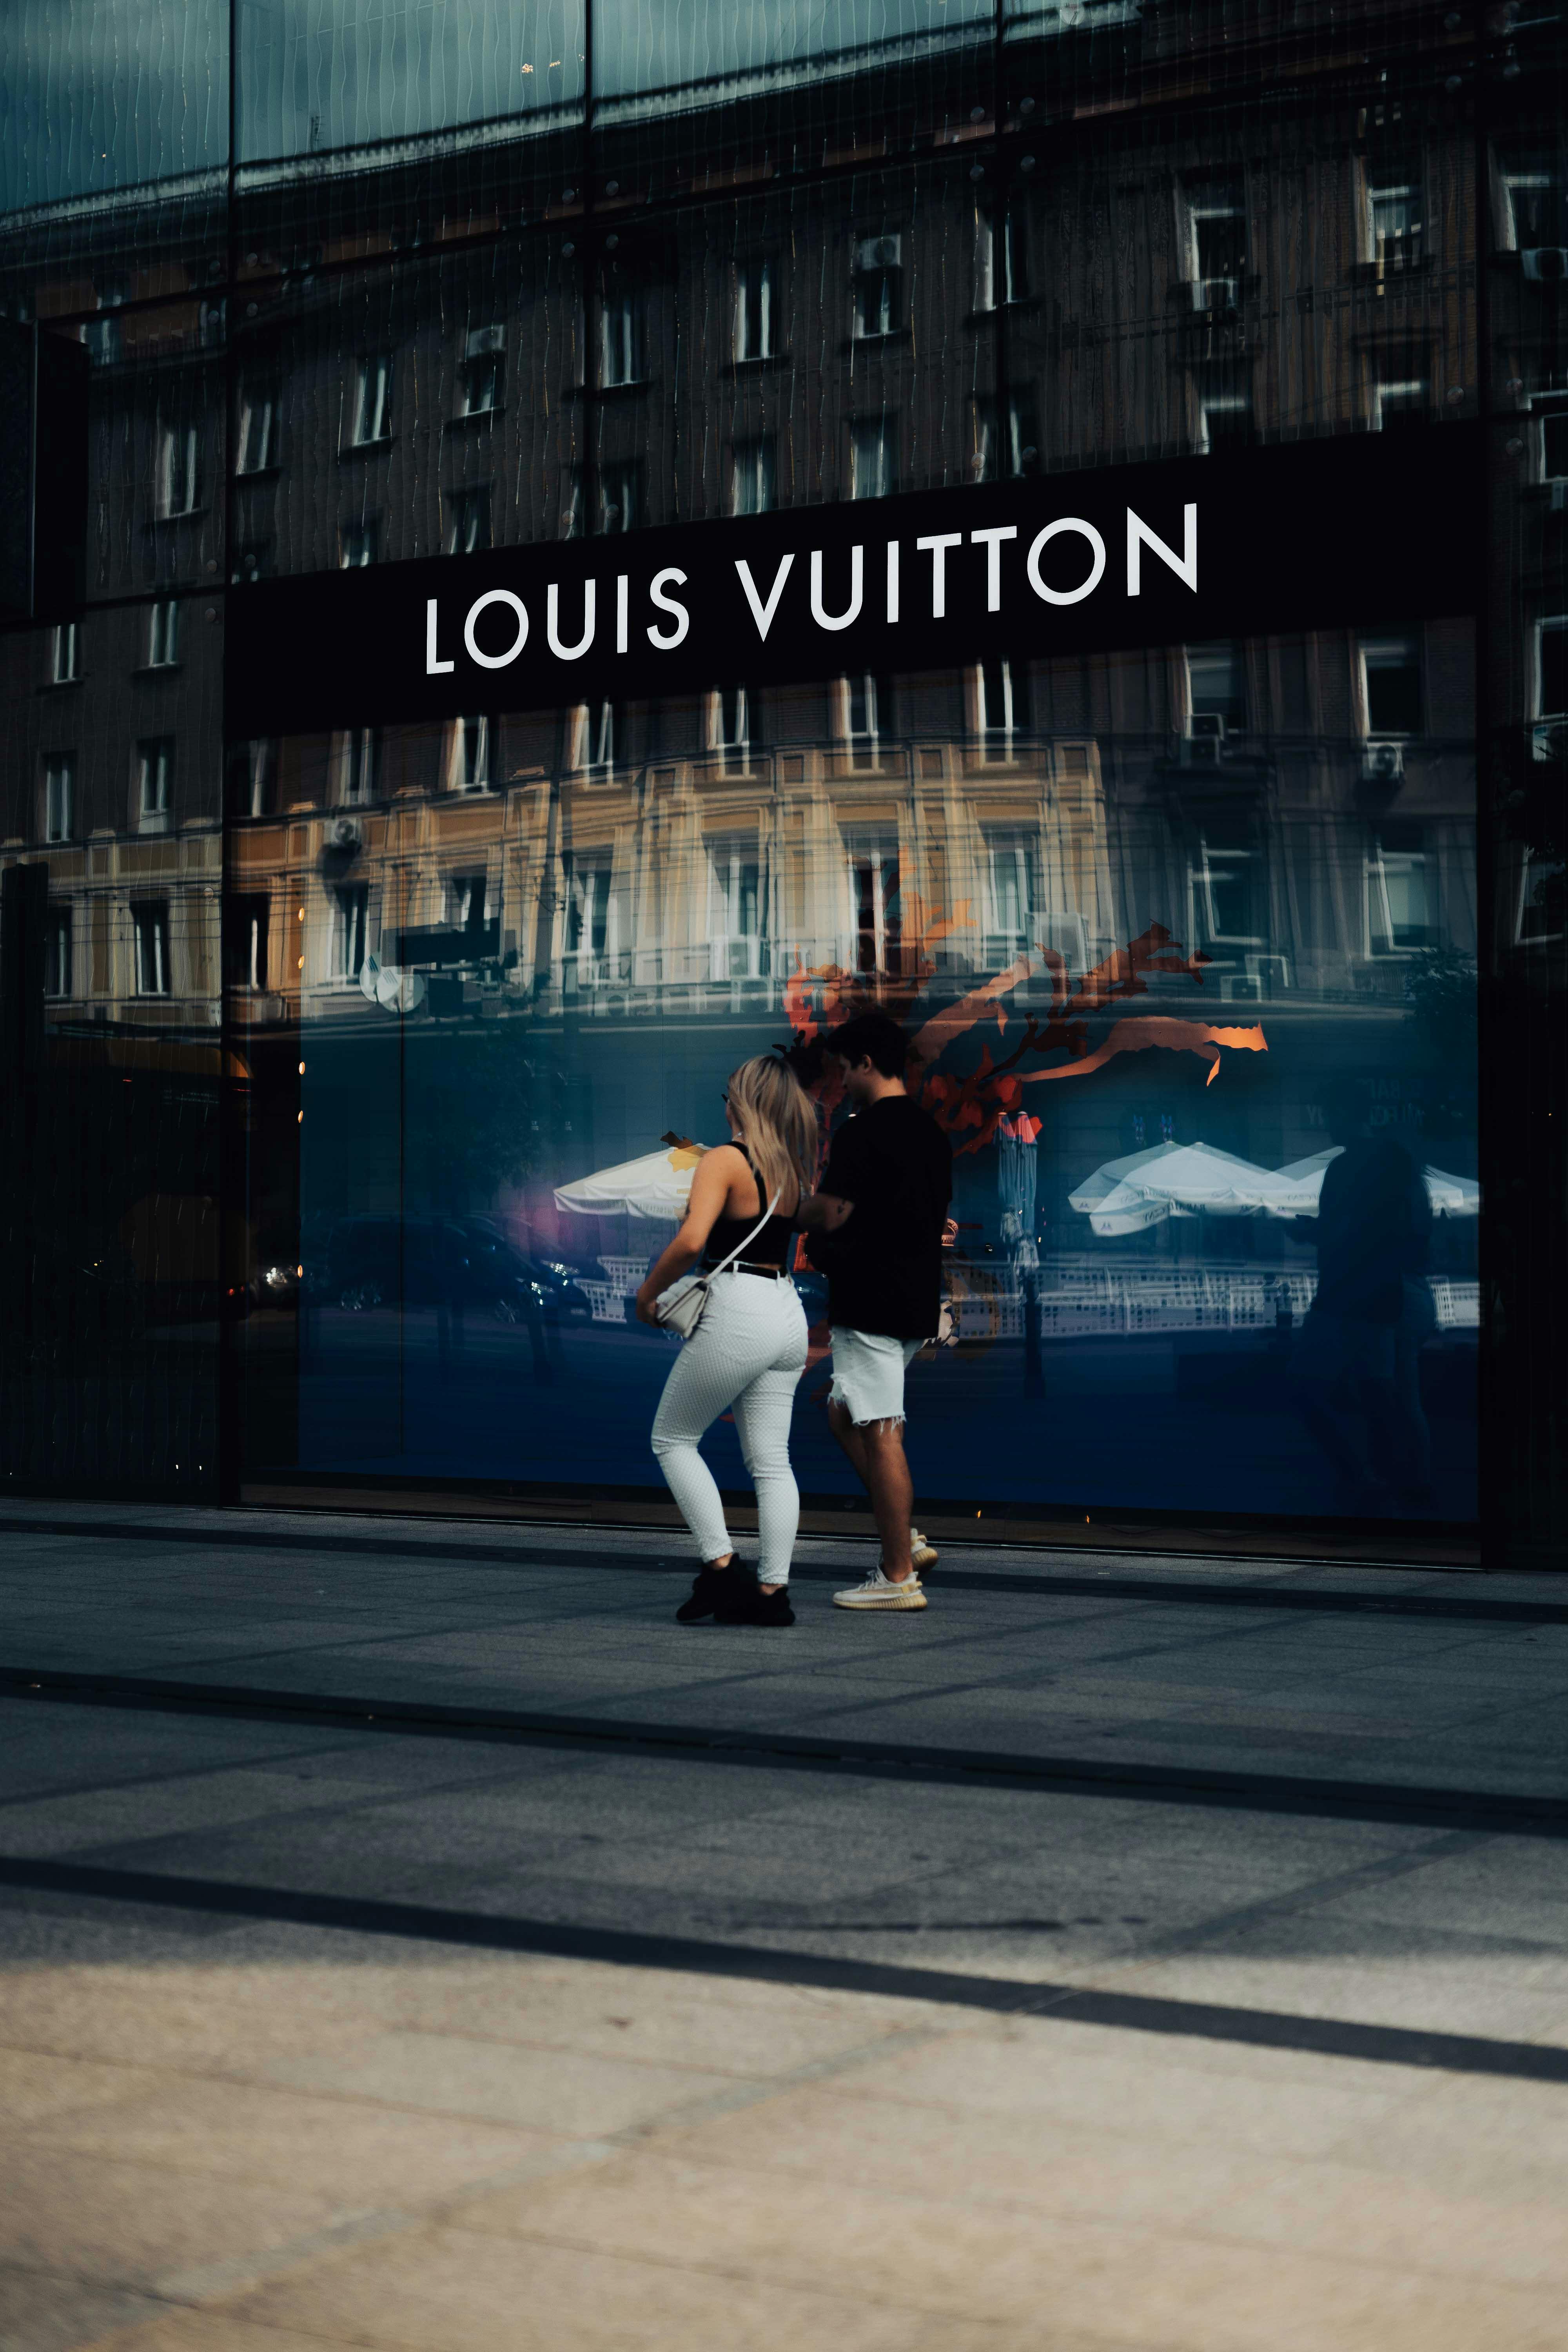 Louis Vuitton Island Store Photos, Download The BEST Free Louis Vuitton  Island Store Stock Photos & HD Images